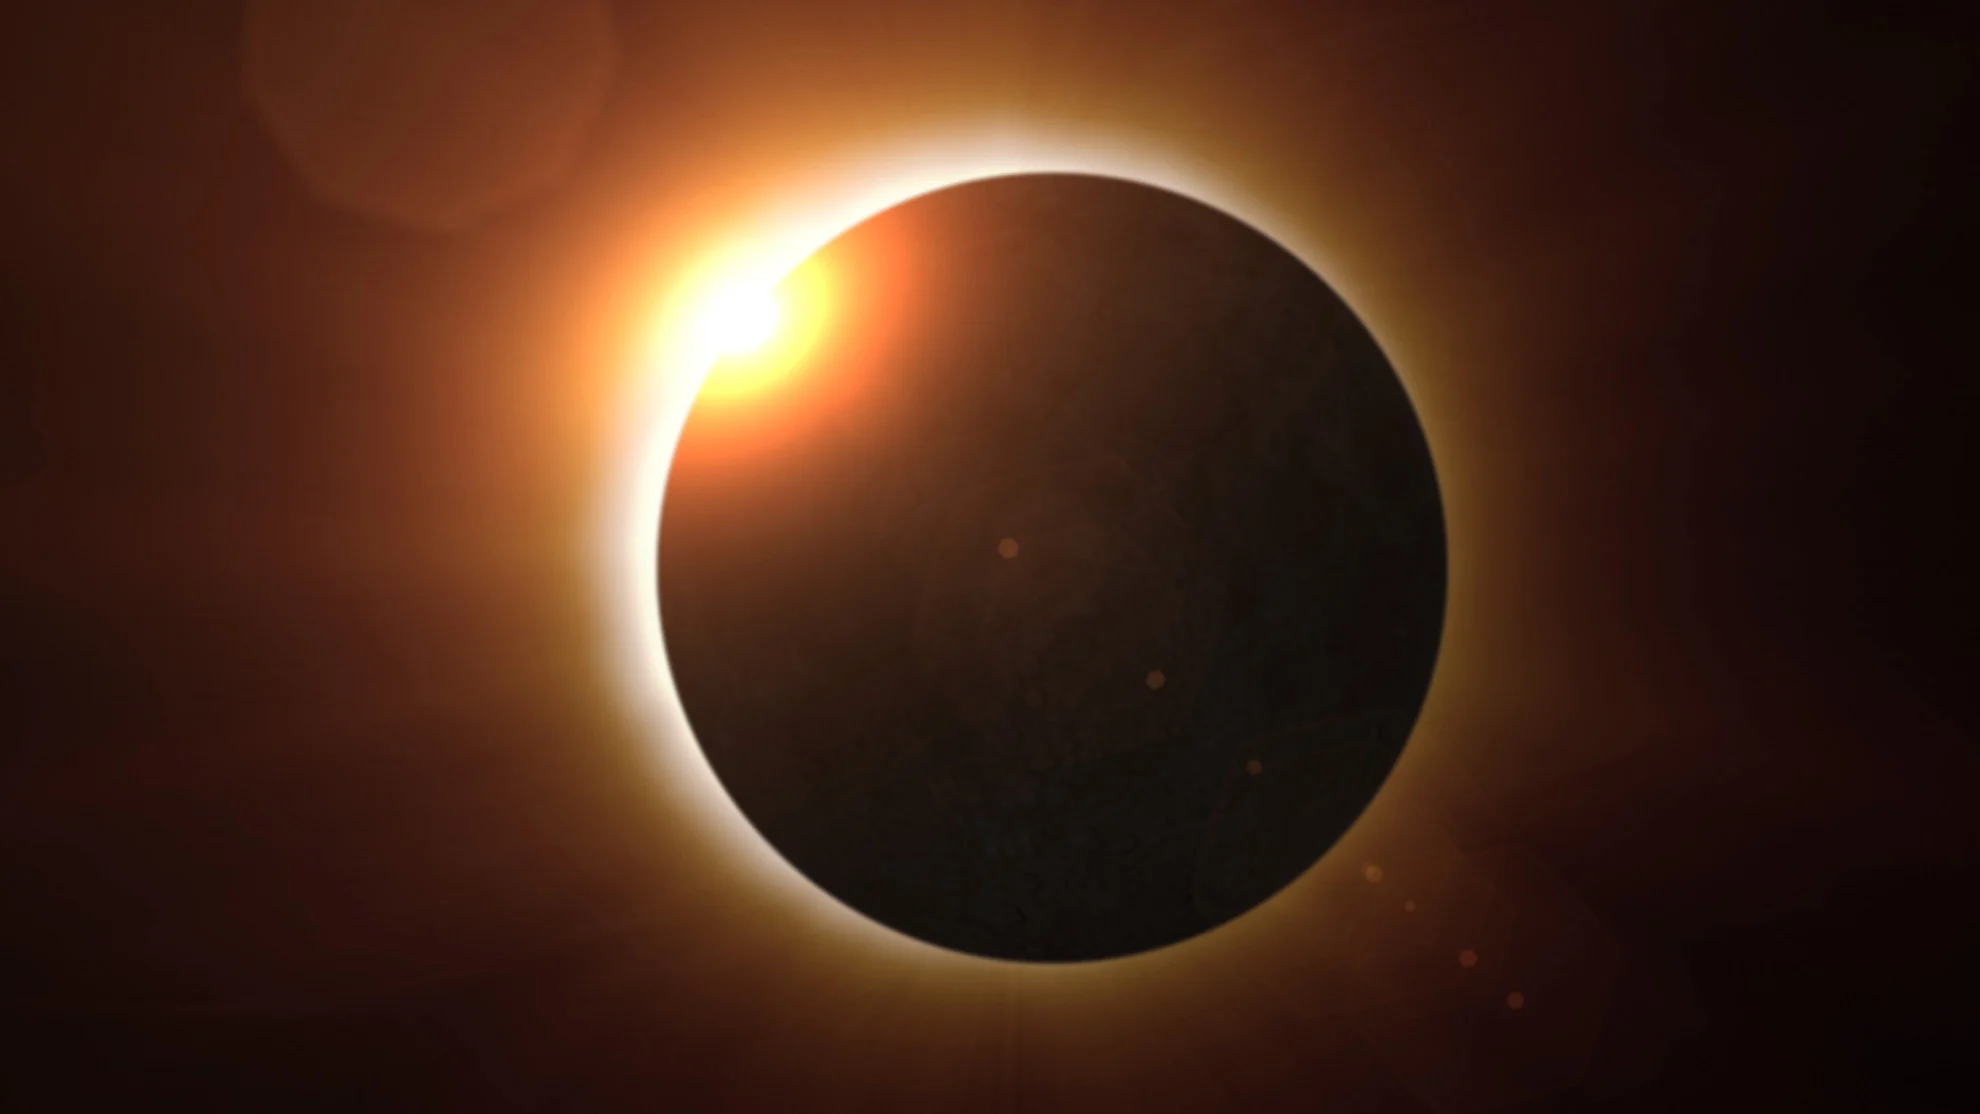 Are you ready for the April 8th Total Solar Eclipse? Here's how to prepare